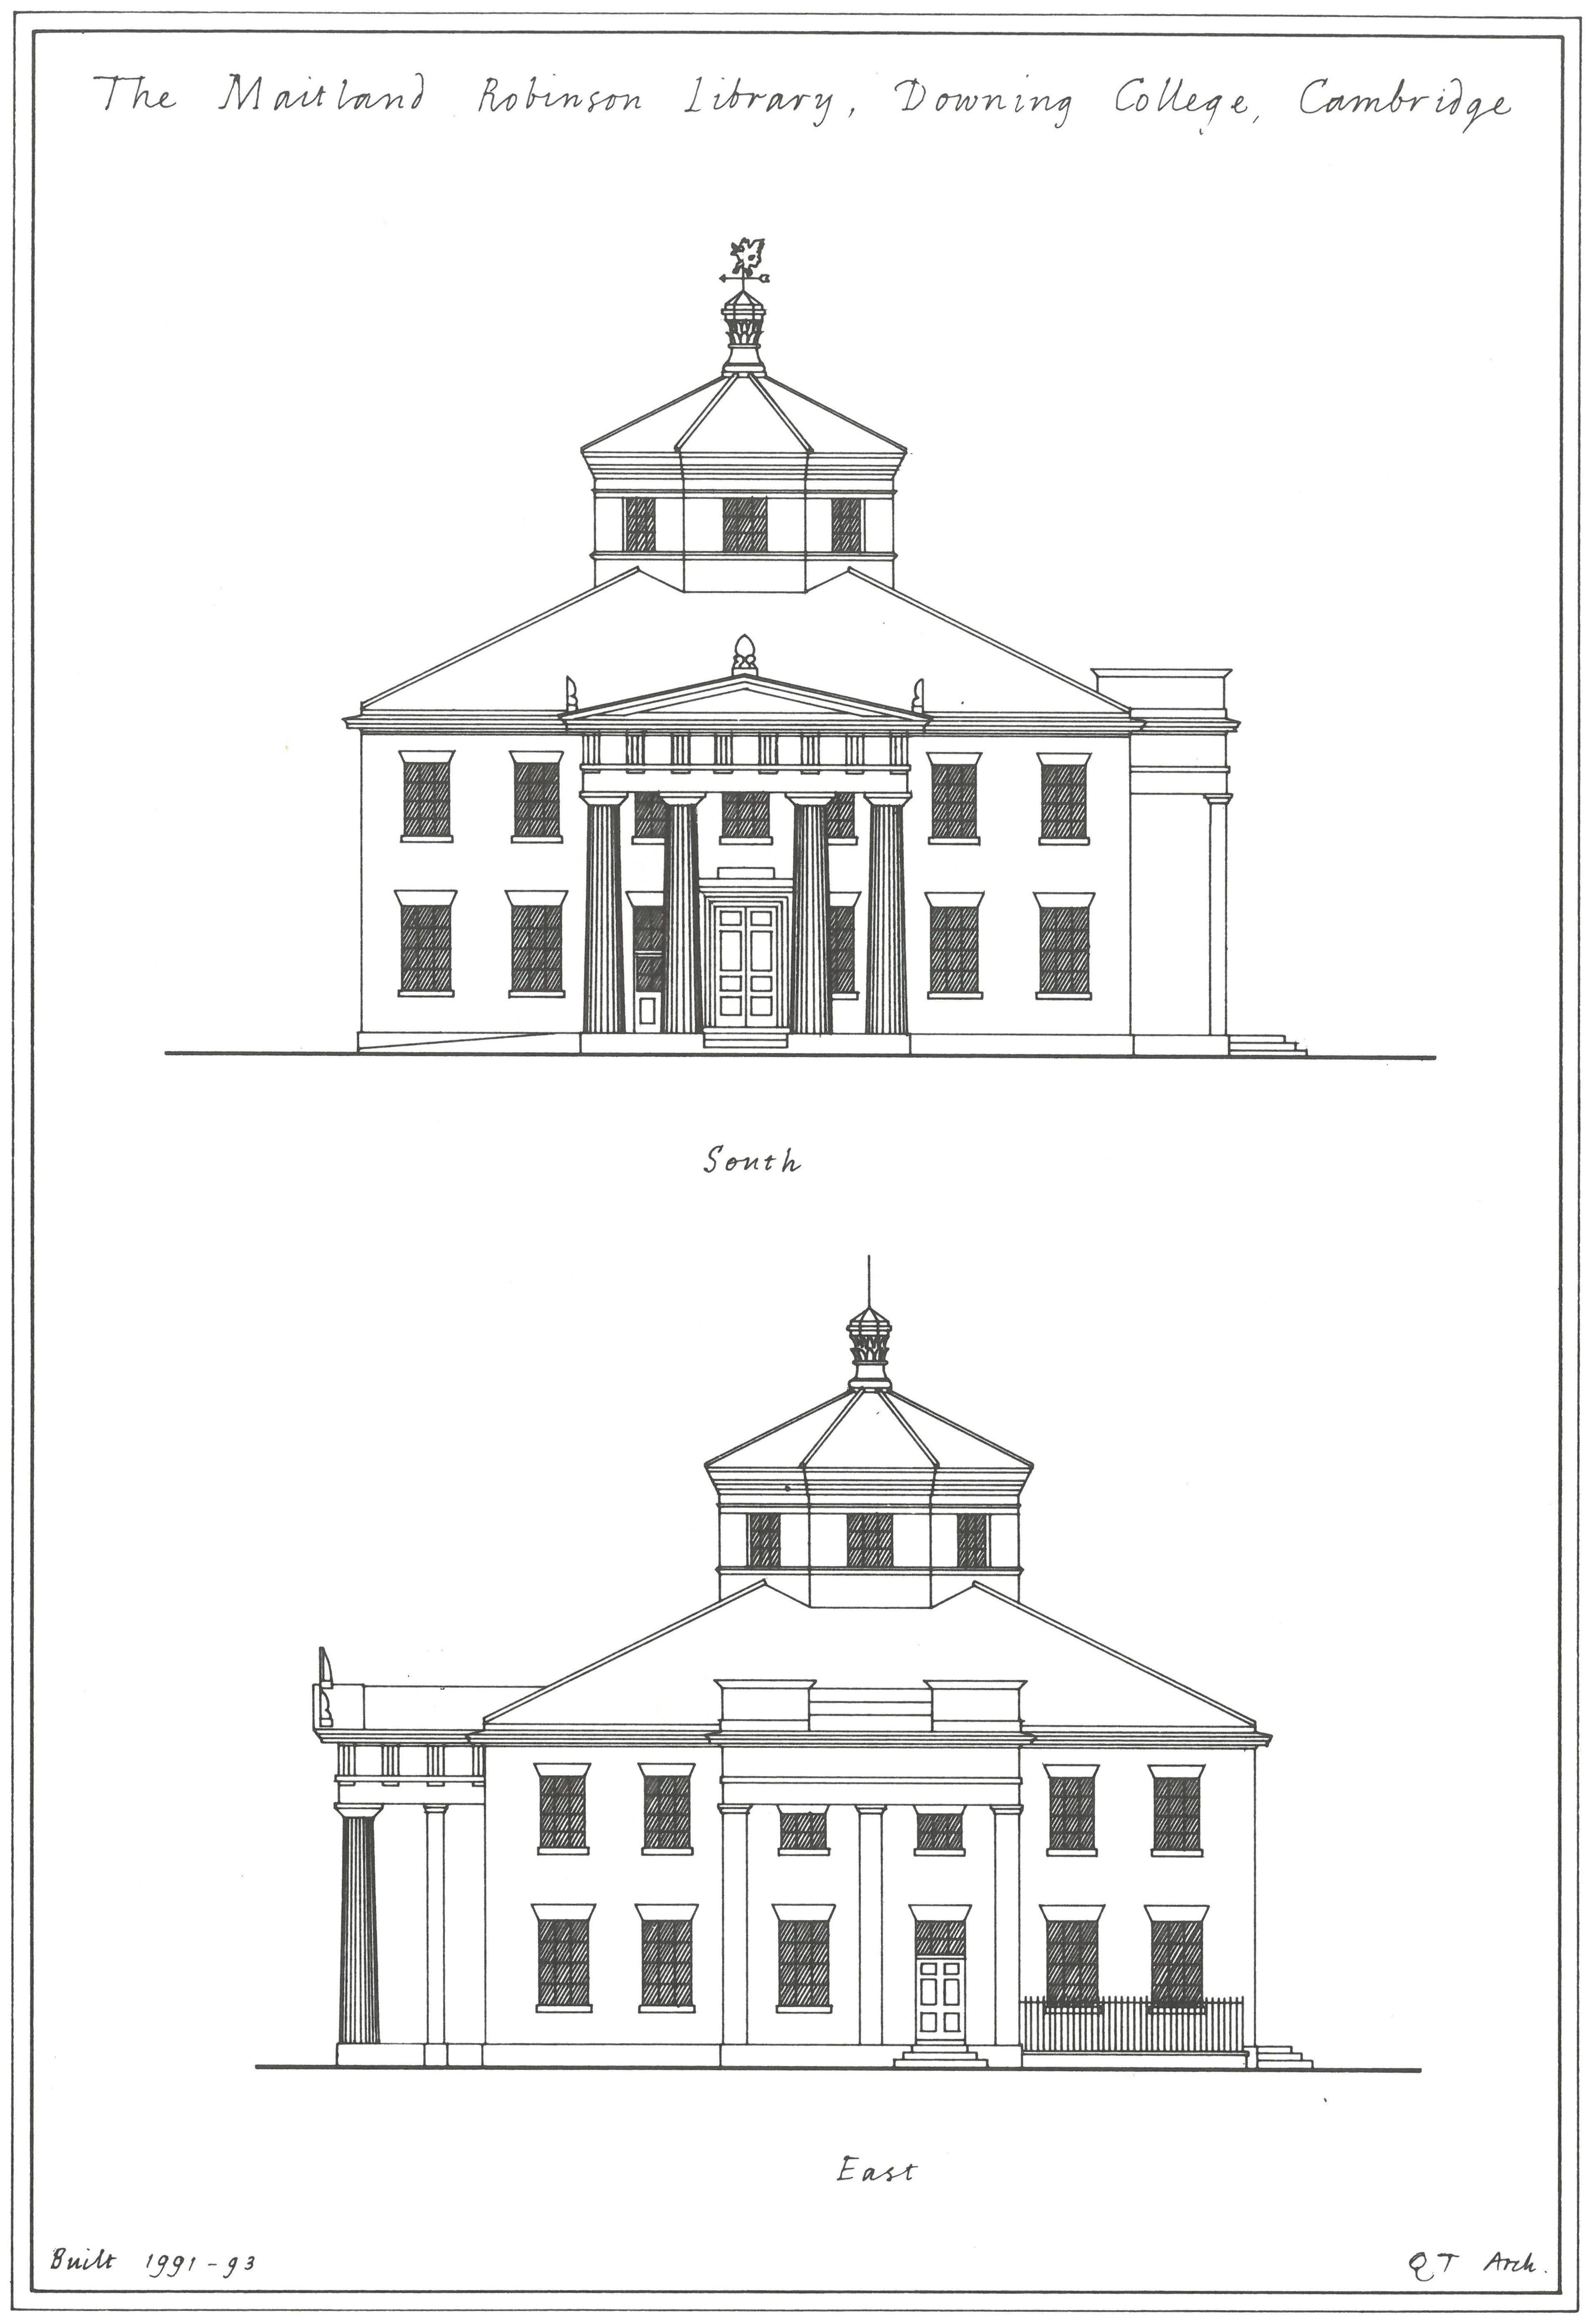 Elevations of the Maitland Robinson Library by Quinlan Terry, Architect